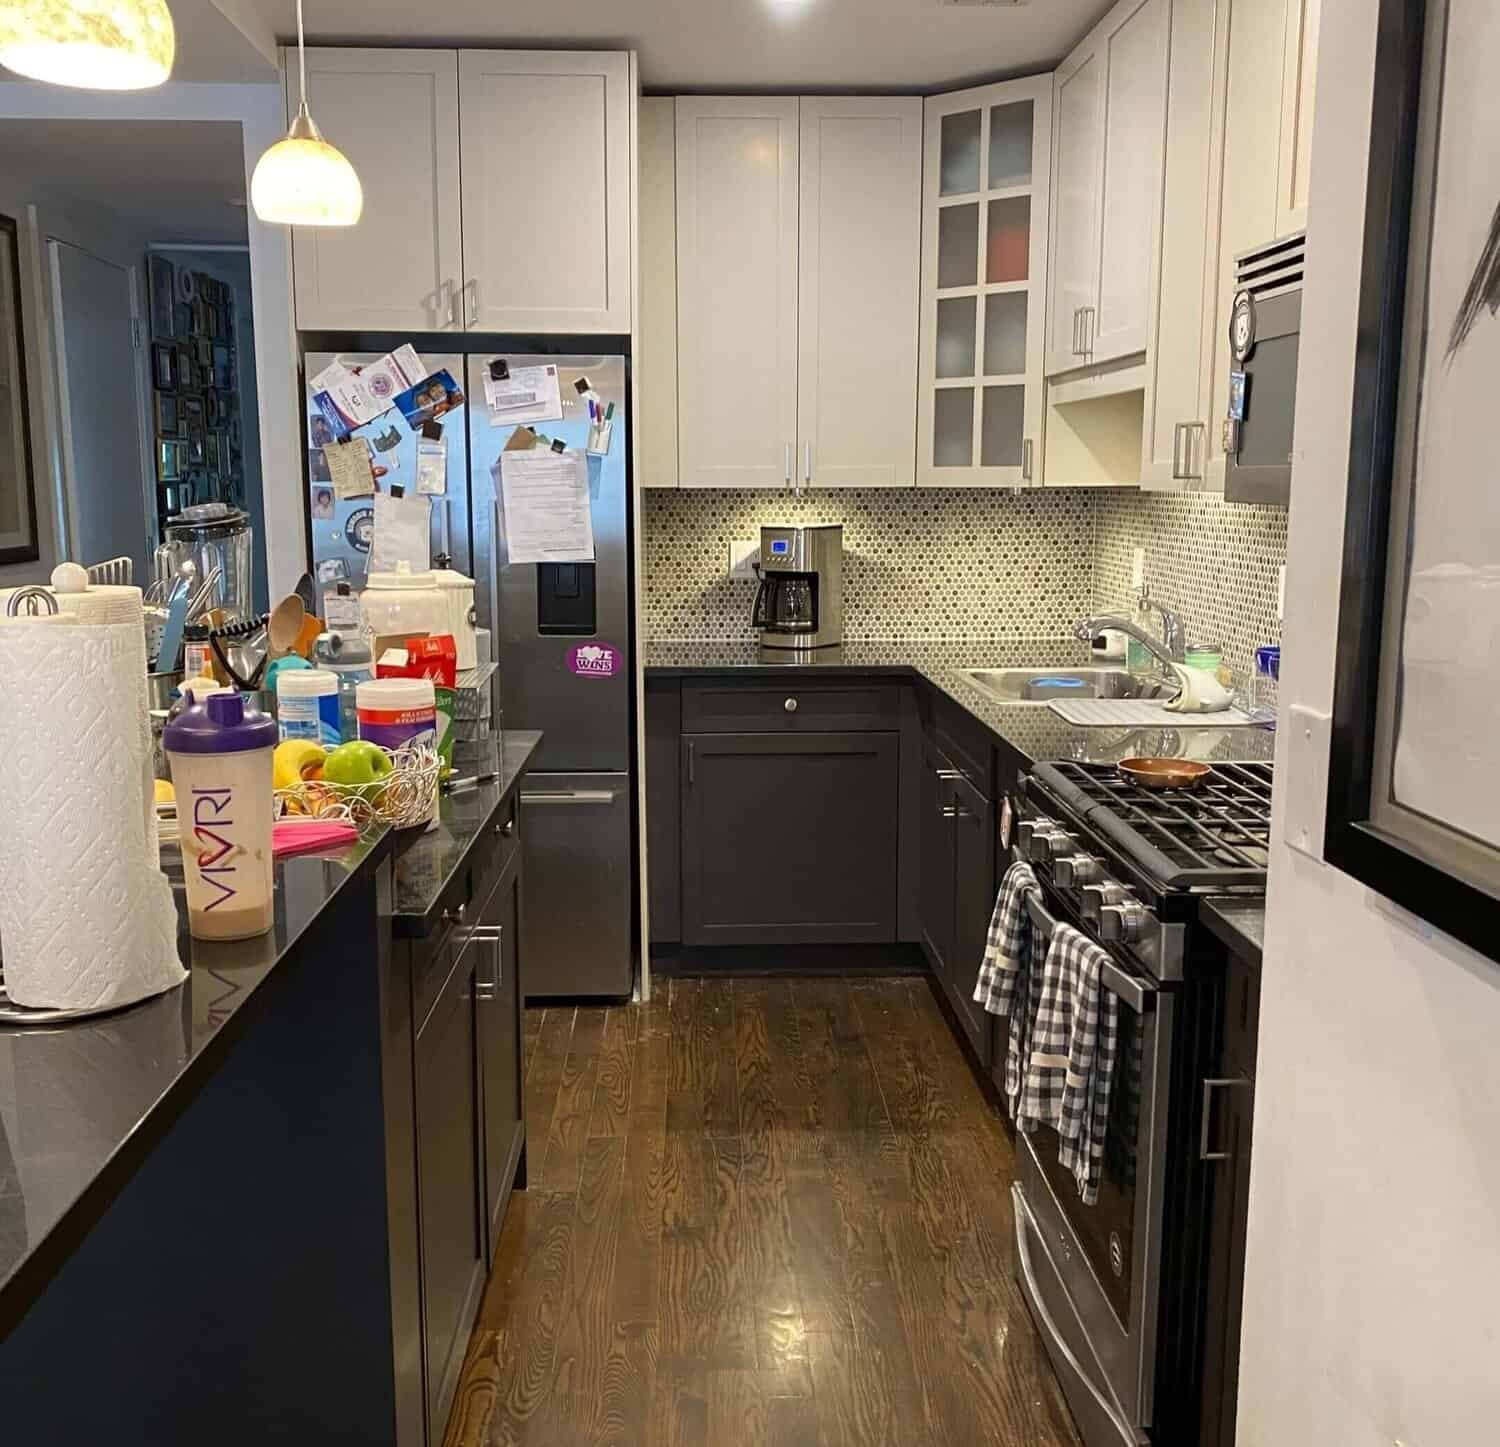 Kitchen with white upper cabinets, dark lower cabinets, a mosaic tile backsplash, and various items on the countertops.